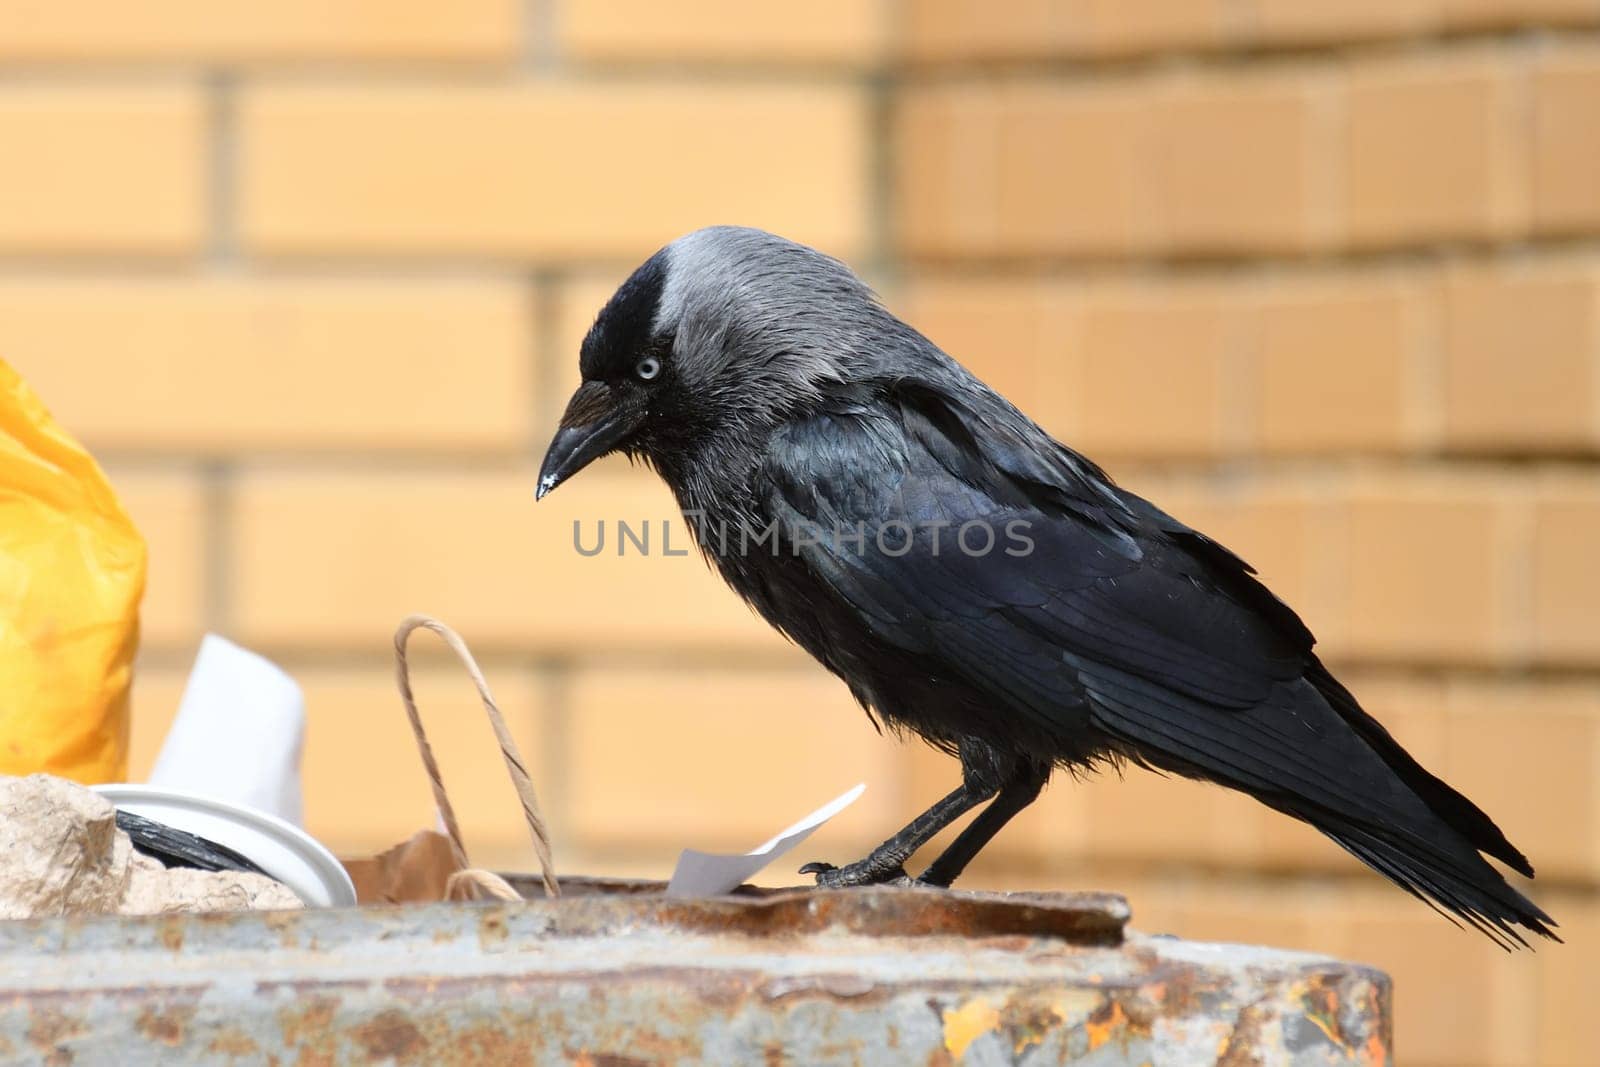 Jackdaw sits on edge of a garbage container